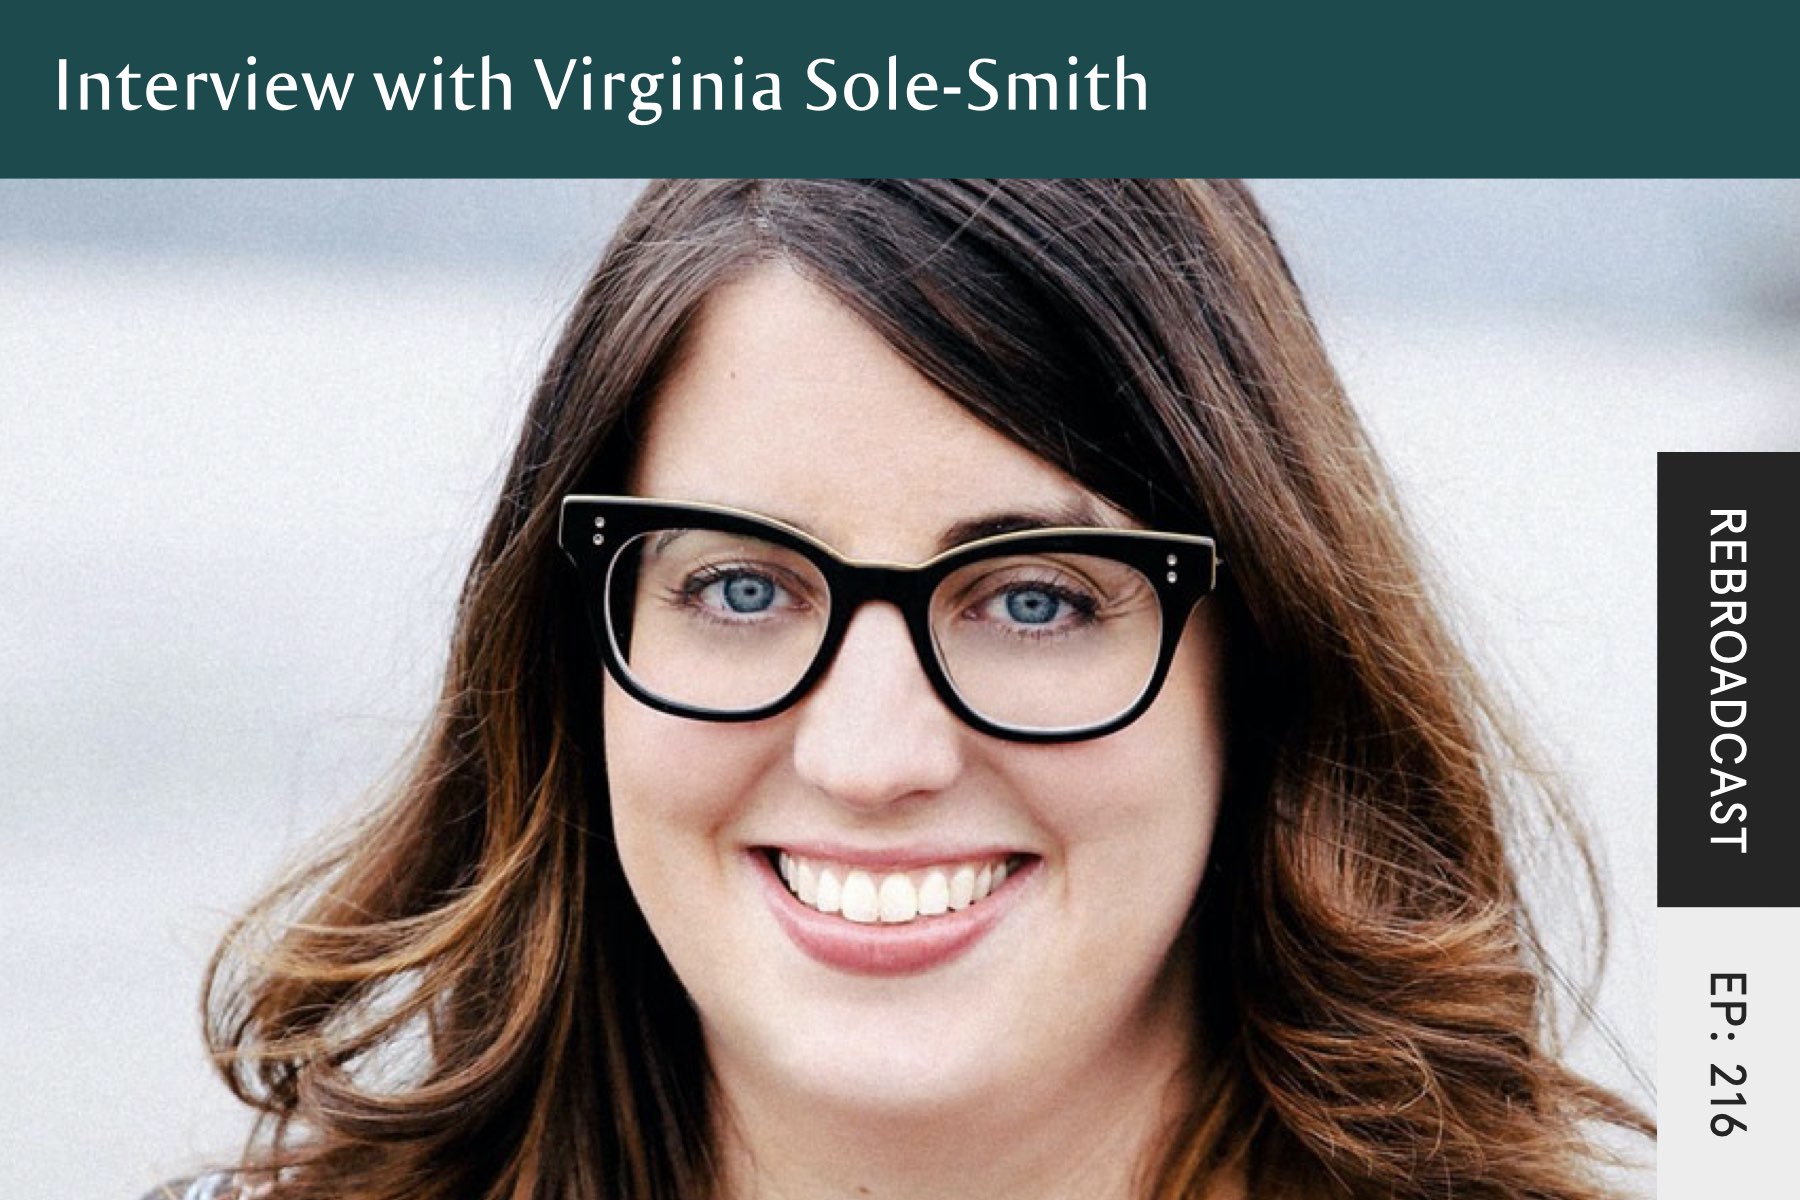 Rebroadcast: The Eating Instinct with Virginia Sole-Smith - Seven Health: Eating Disorder Recovery and Anti Diet Nutritionist